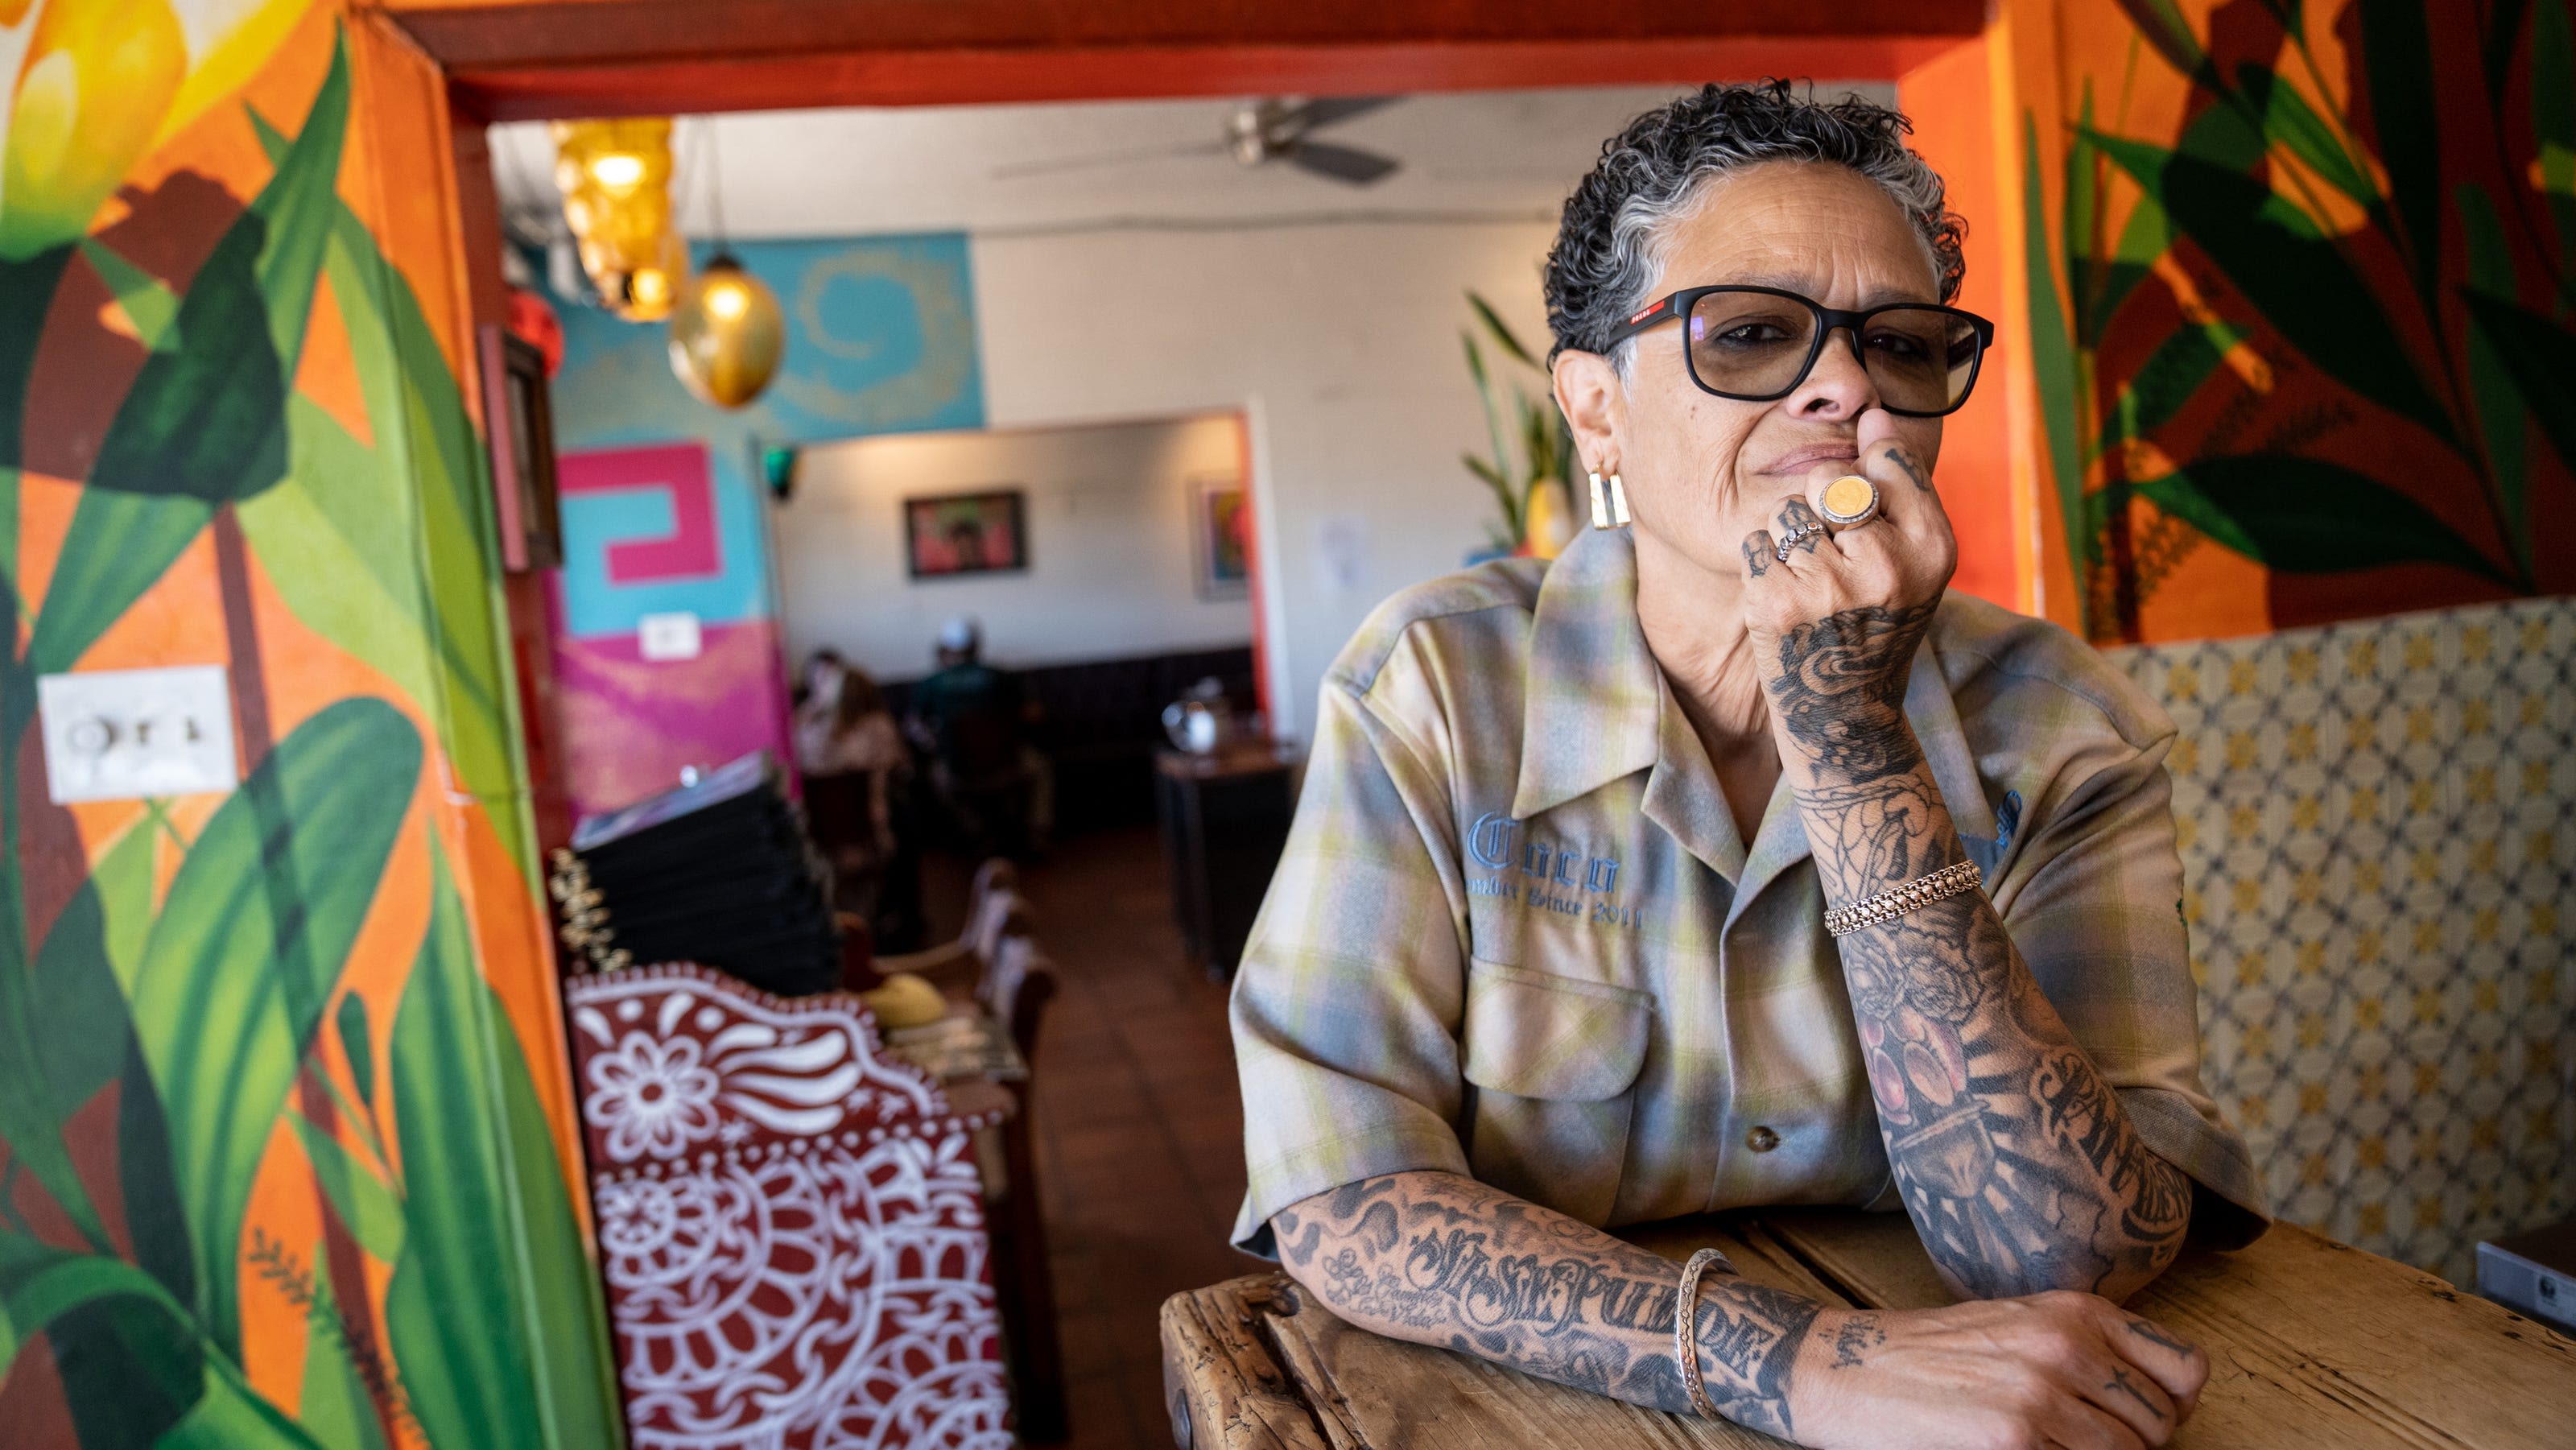 'I just had to come back one last time.' Customers say goodbye to Barrio Cafe in Phoenix